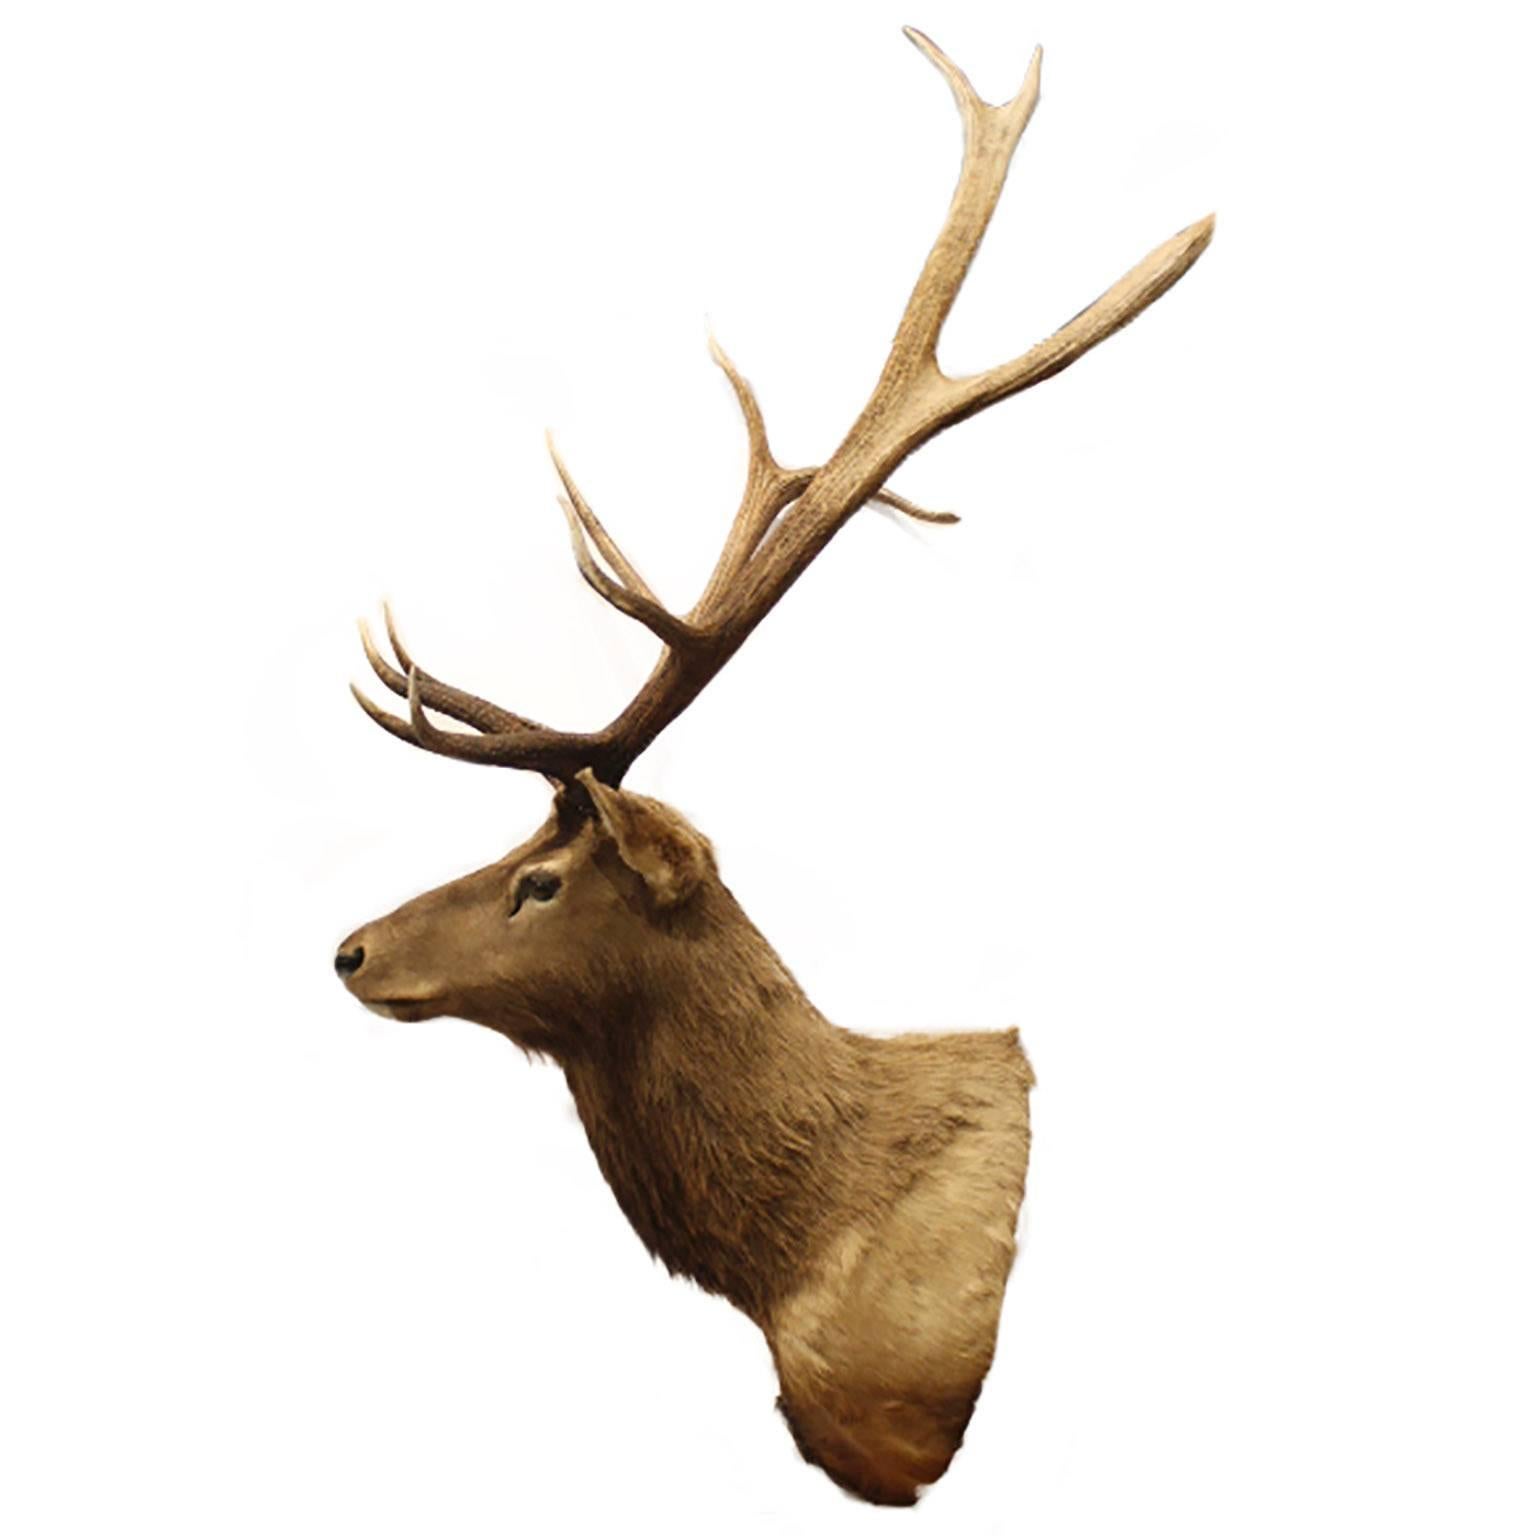 14 point bull elk culled legally from Ted Turner's ranch in Montana as part of a program with the local Native American tribe to control the herd population. This elk should mount was on display for two years at the Museum of the Rockies in Bozeman,